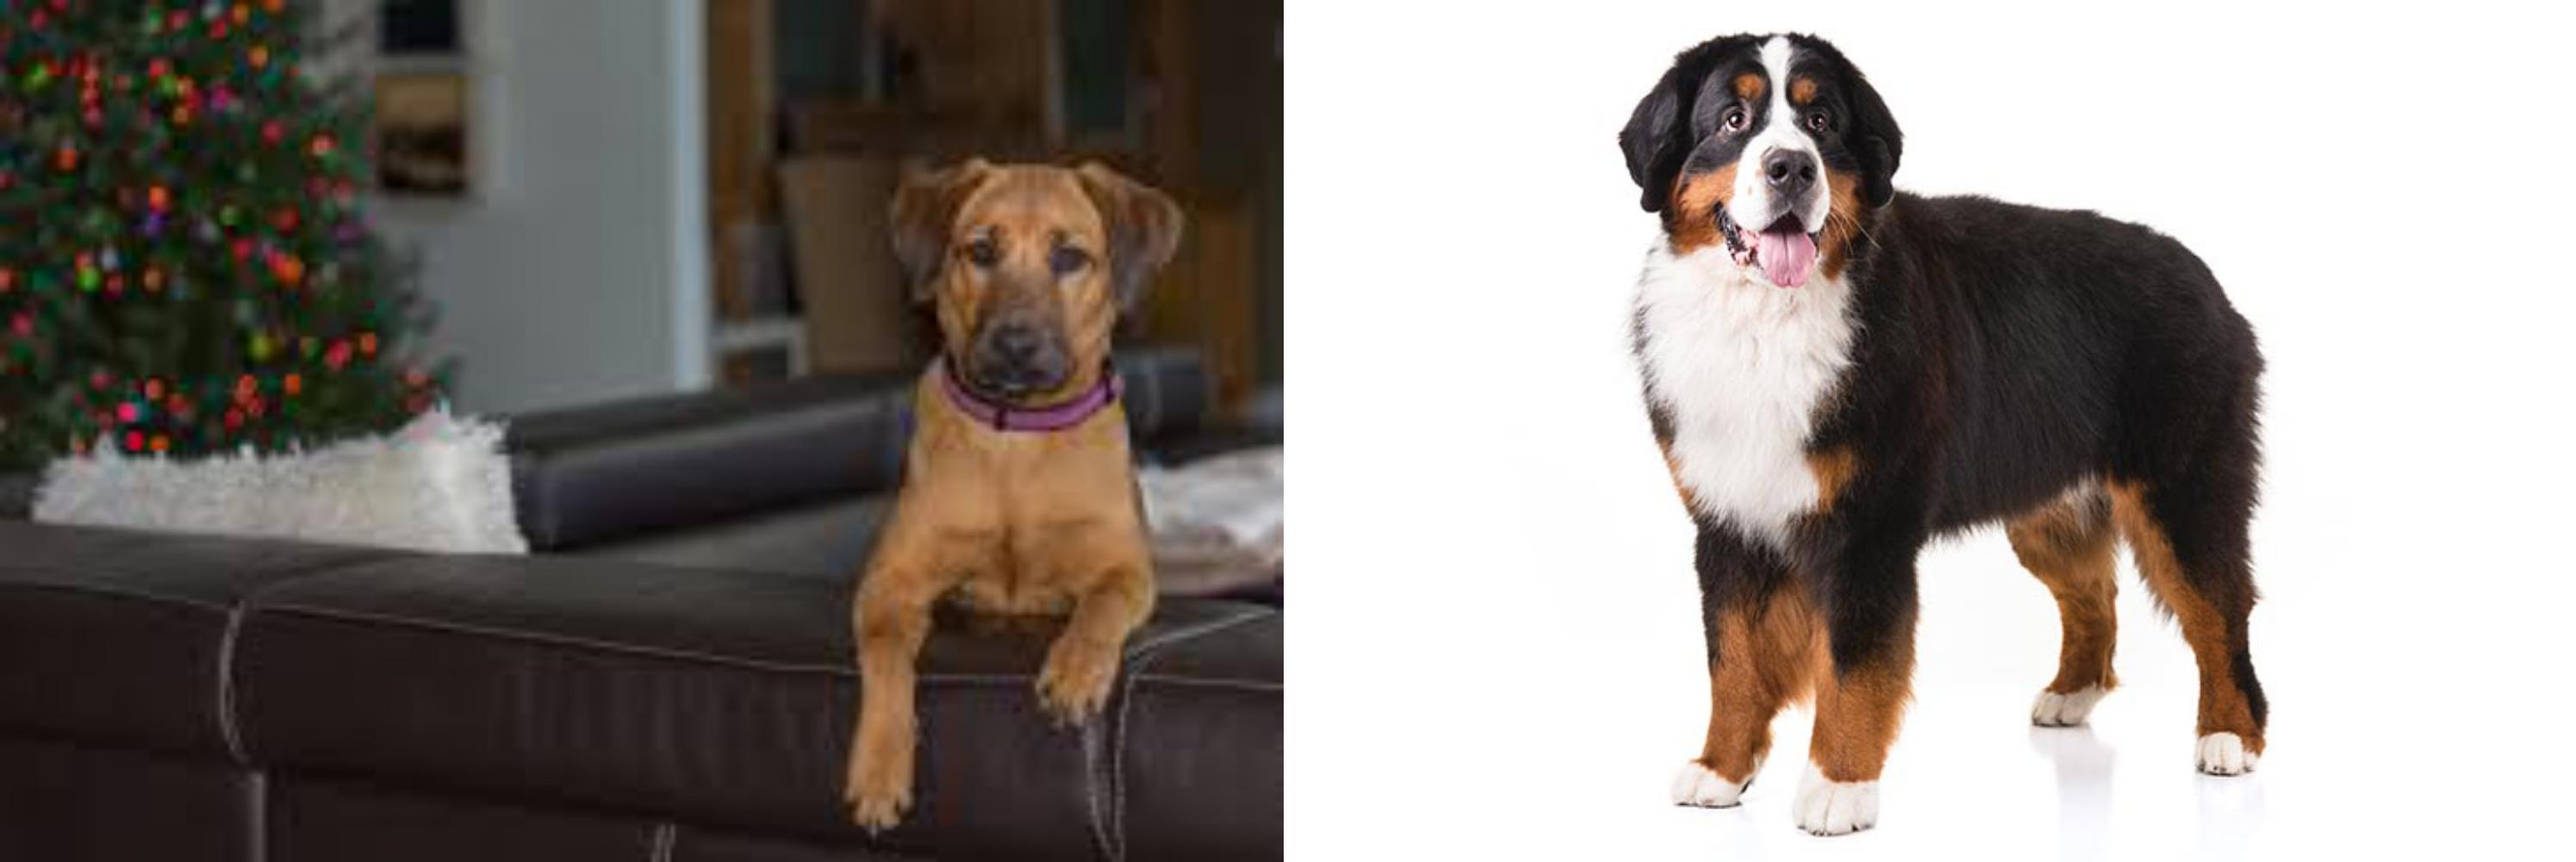 Black Mouth Cur Vs Bernese Mountain Dog Breed Comparison